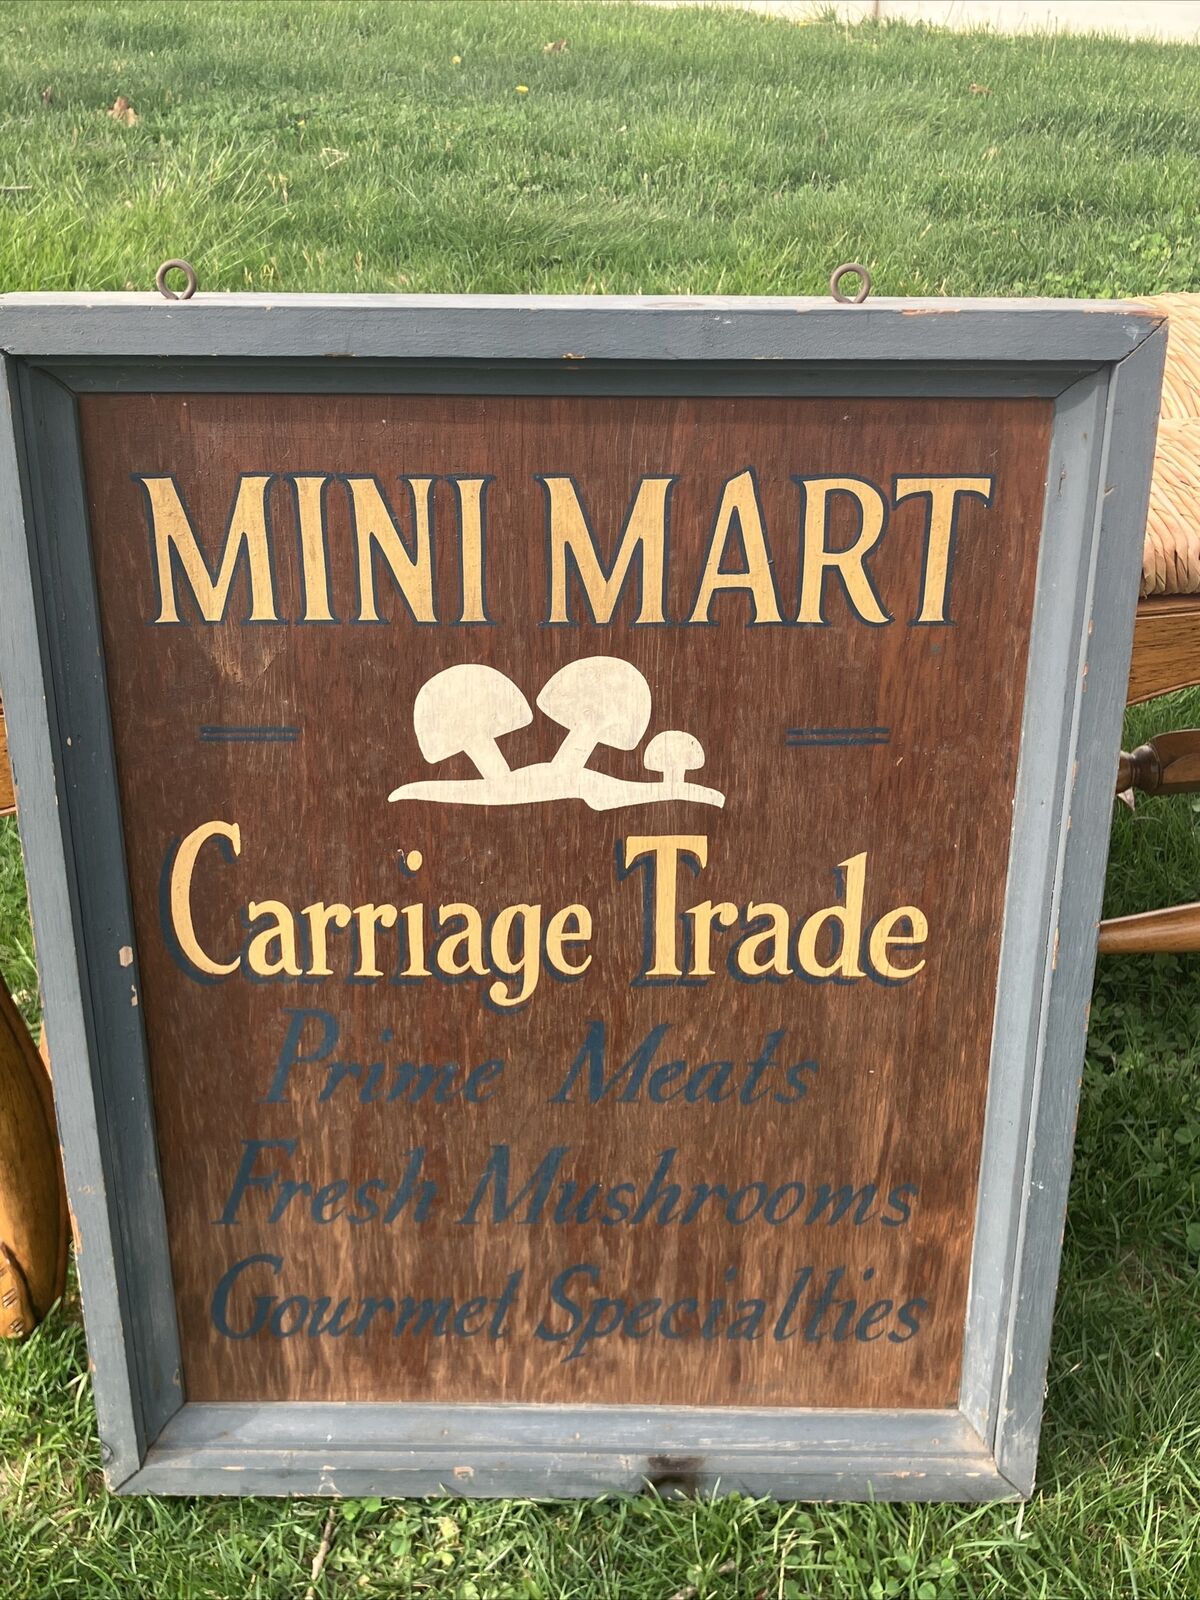 Two Sided Mini Mart Market Sign Carriage Trade Prime Meats Gourmet Specialties